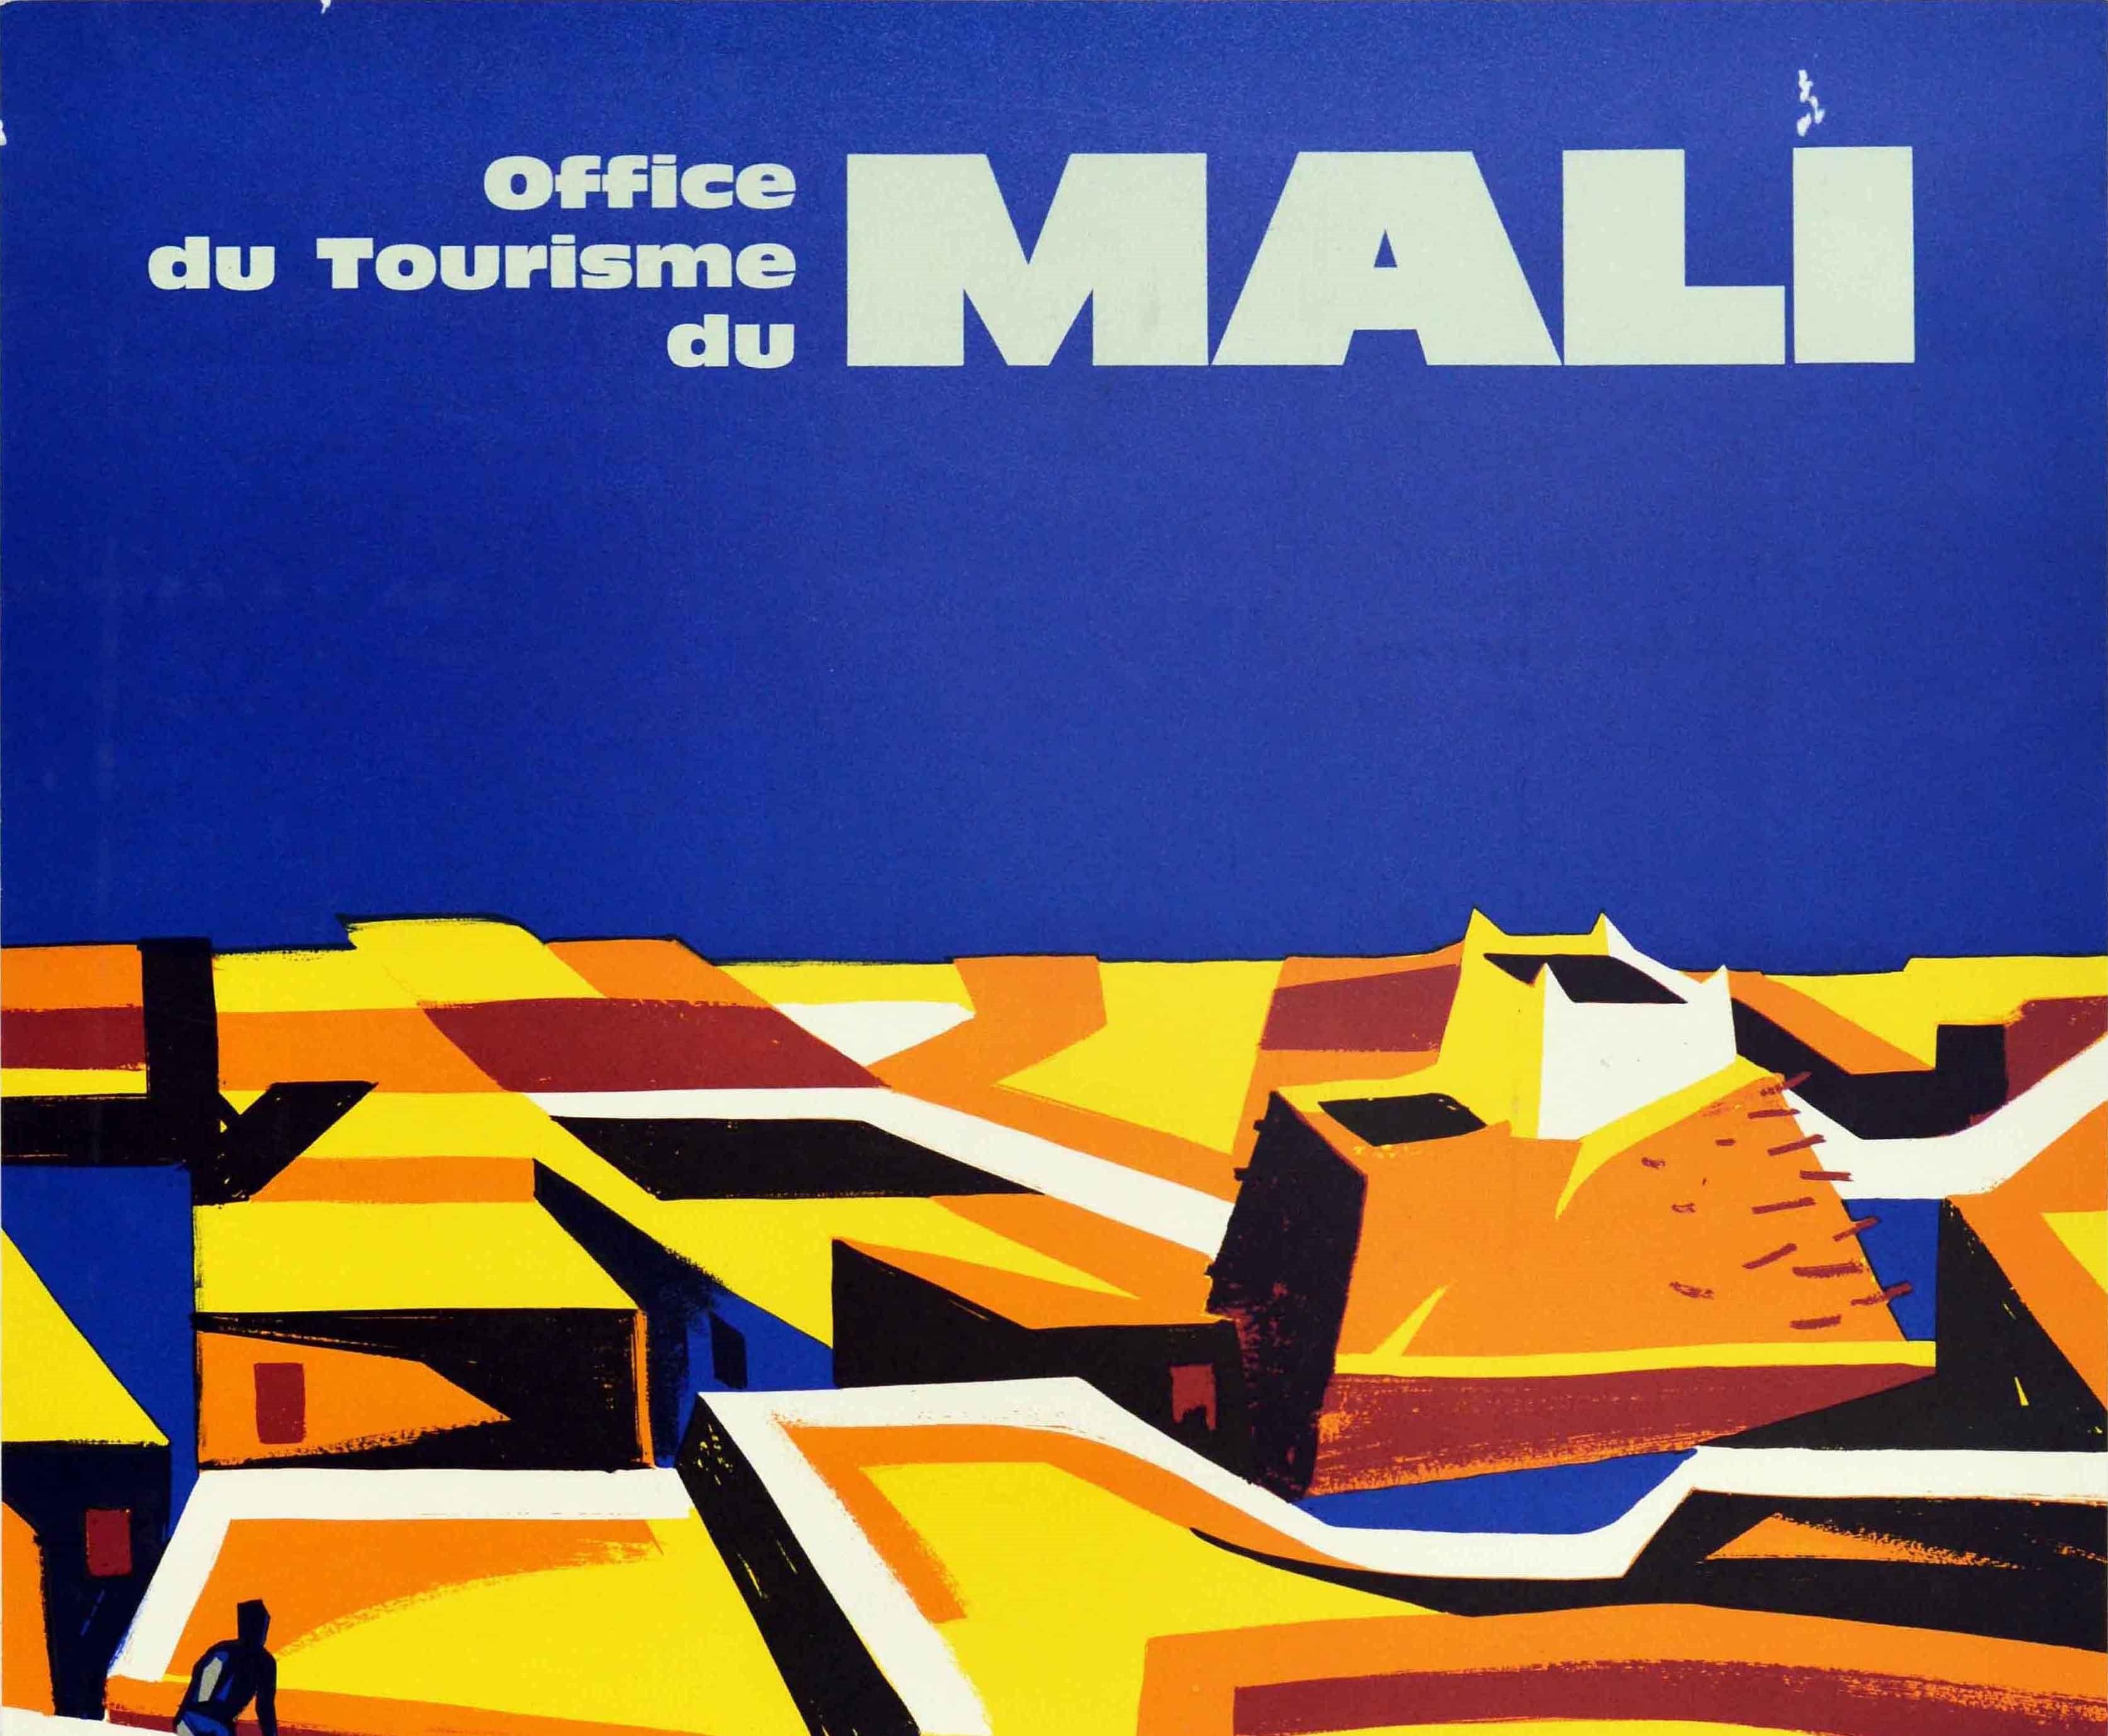 Original Vintage Travel Poster Mali Gao West Africa Office Du Tourisme City View - Print by Rault